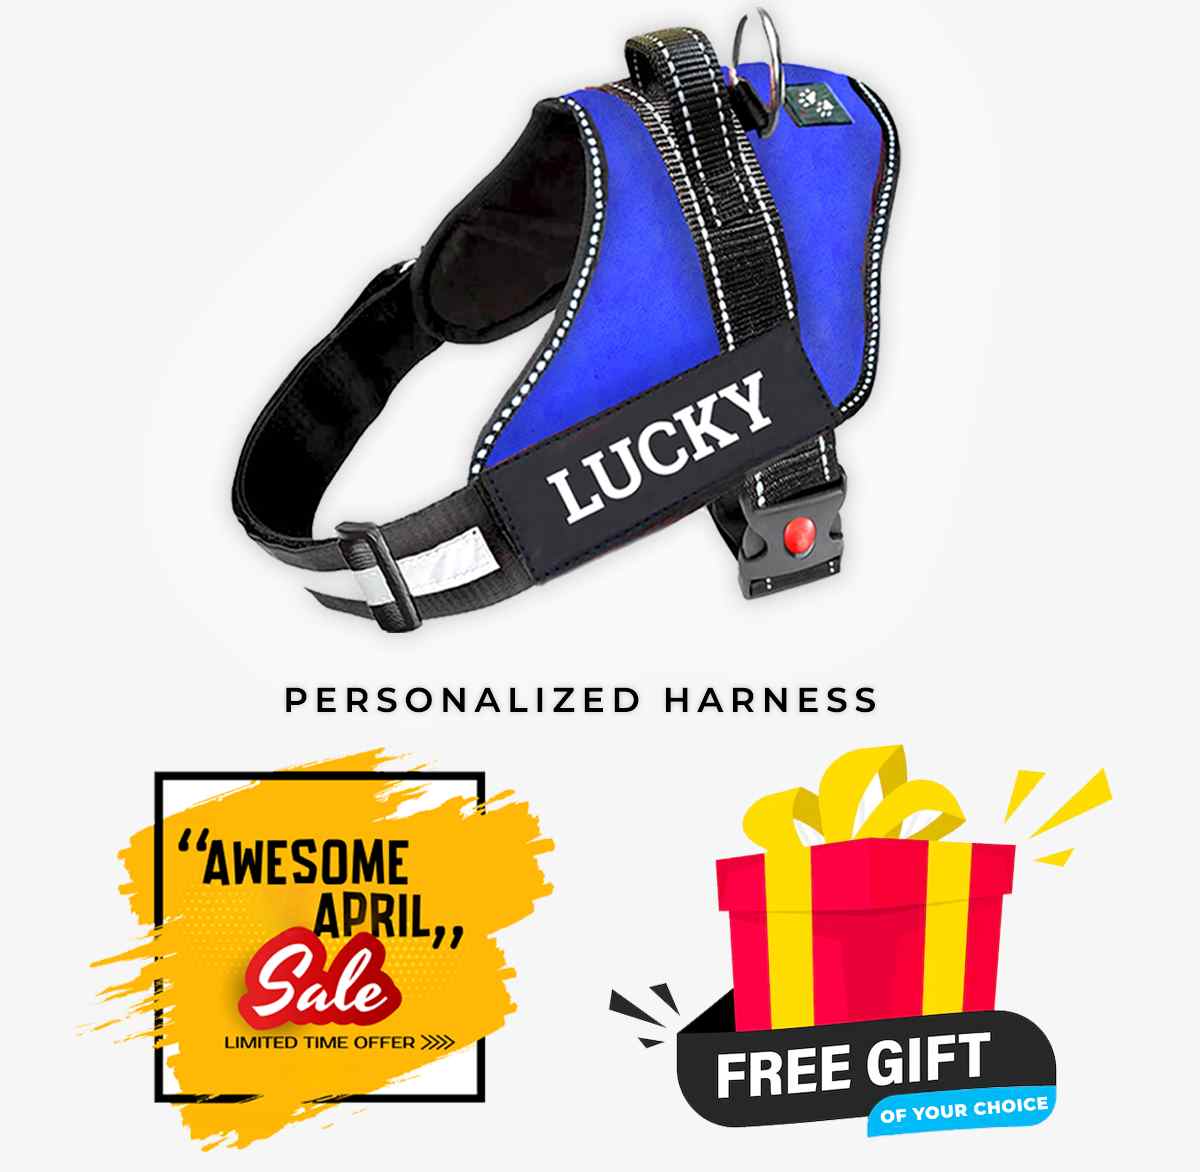 Personalized Dog Harness - BLUE